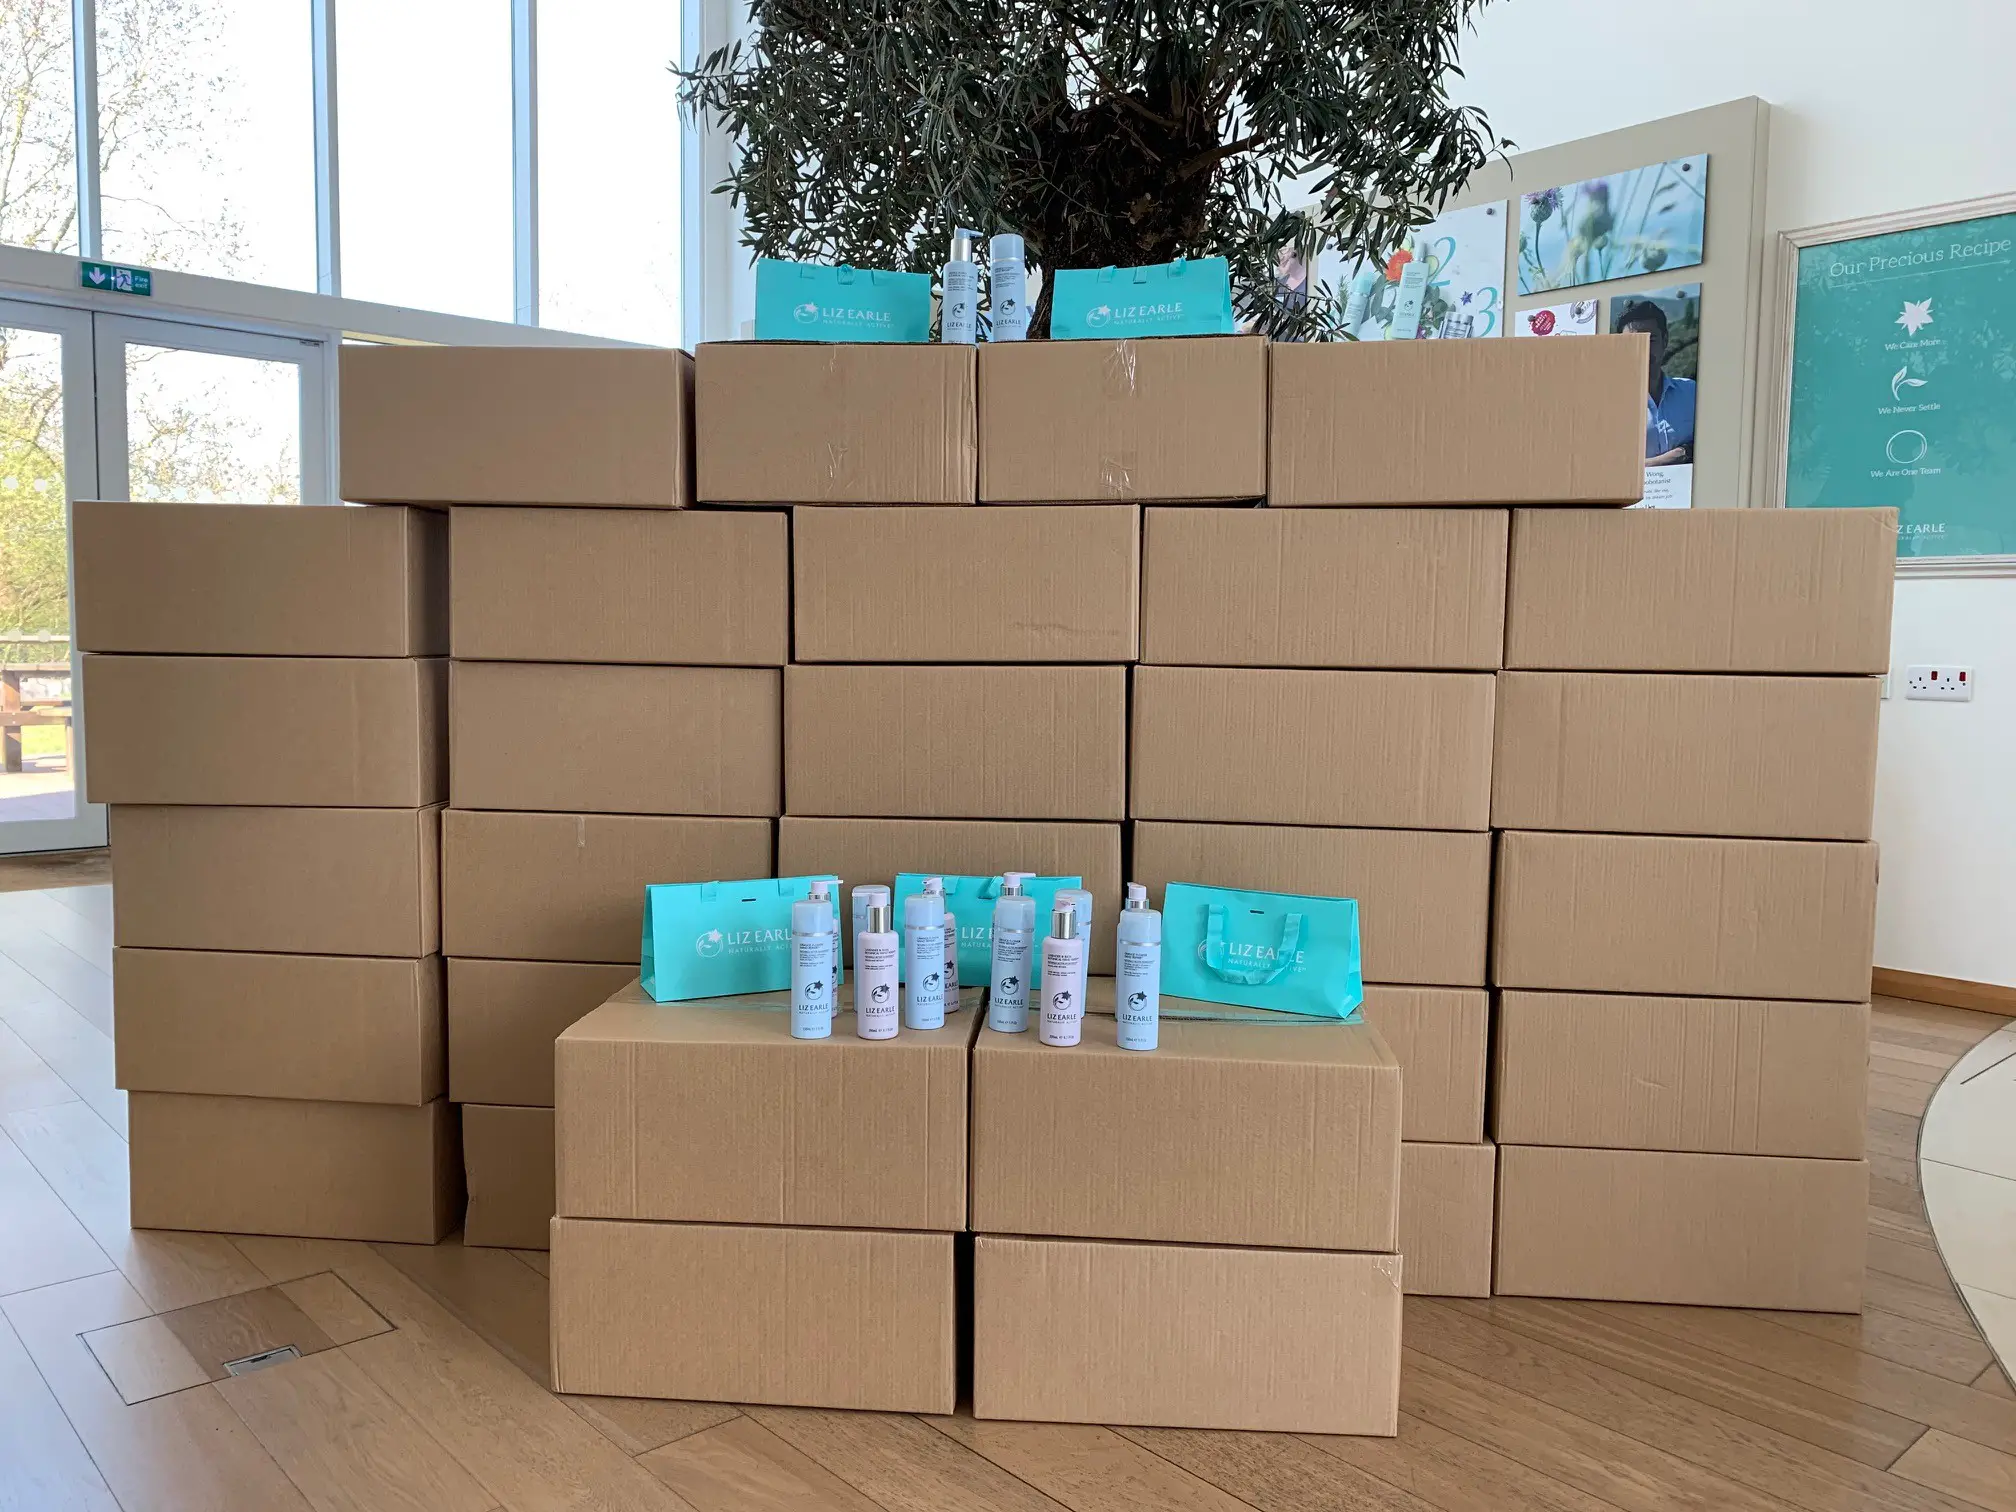 Liz Earle Care packages at St Mary's Hospital